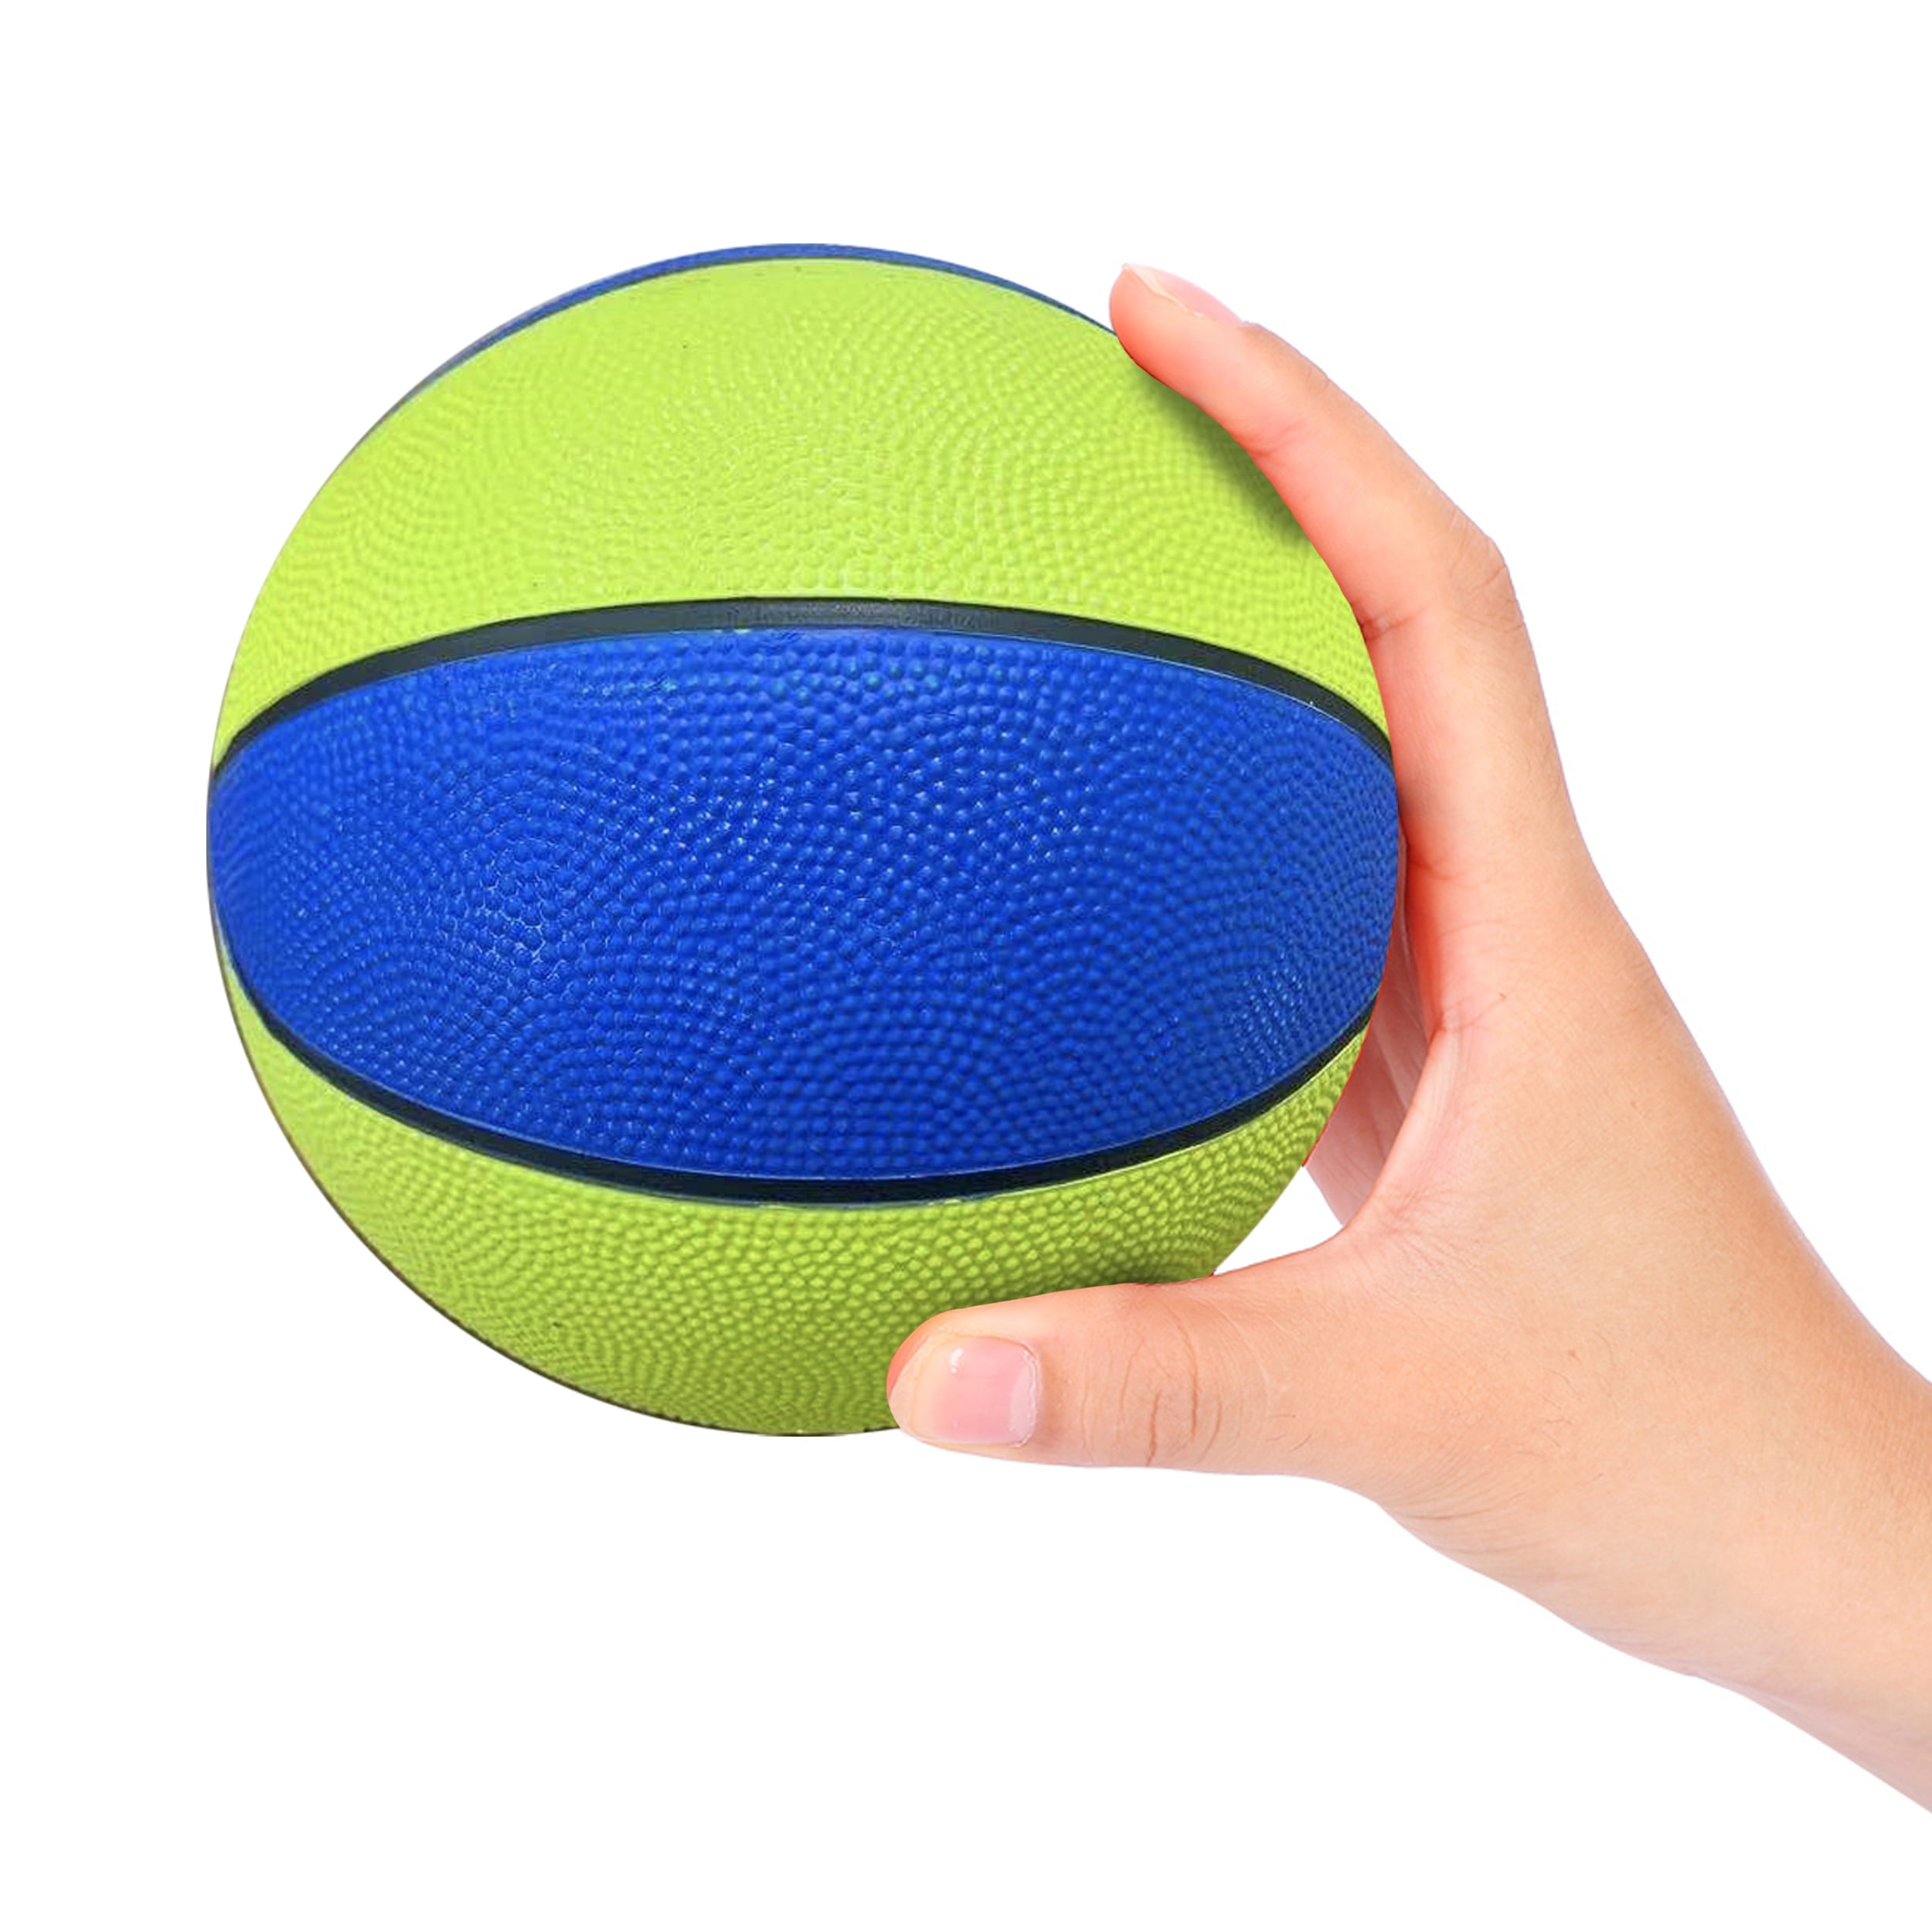 Mini Rubber Basketball Unisex Kids Children Indoor Outdoor Play Game Ball Toy 